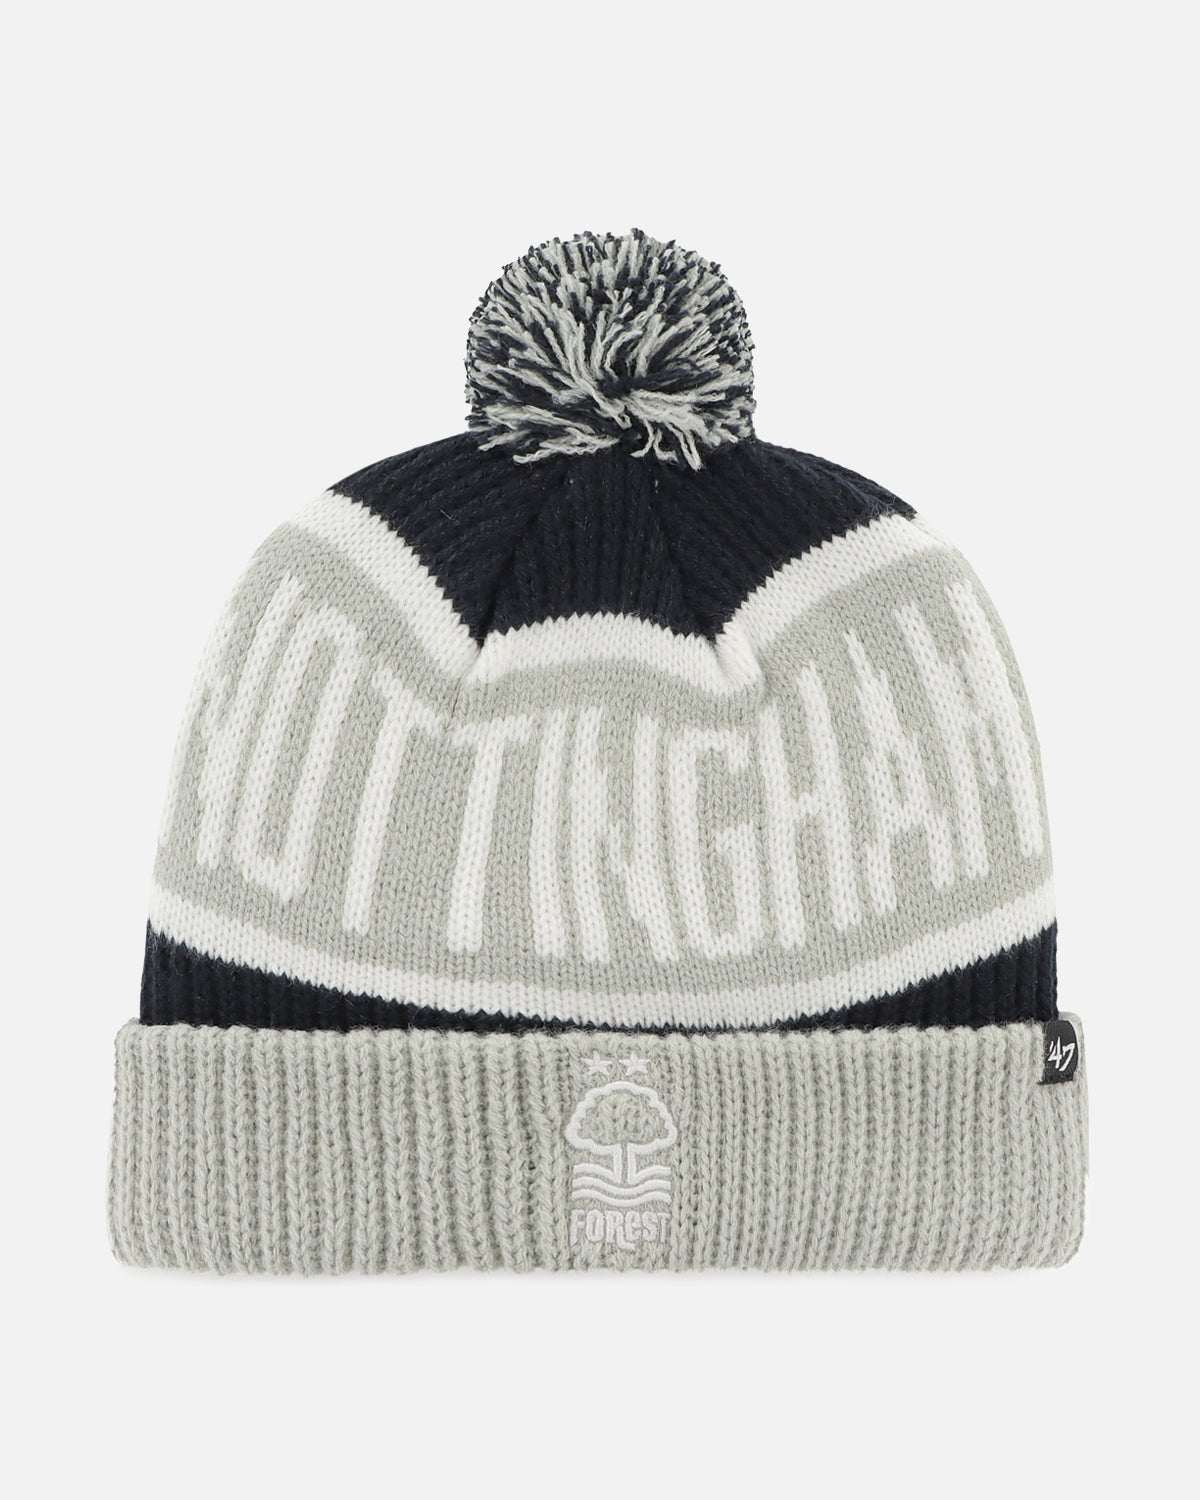 NFFC Navy '47 Calgary Cuff Knit - Nottingham Forest FC